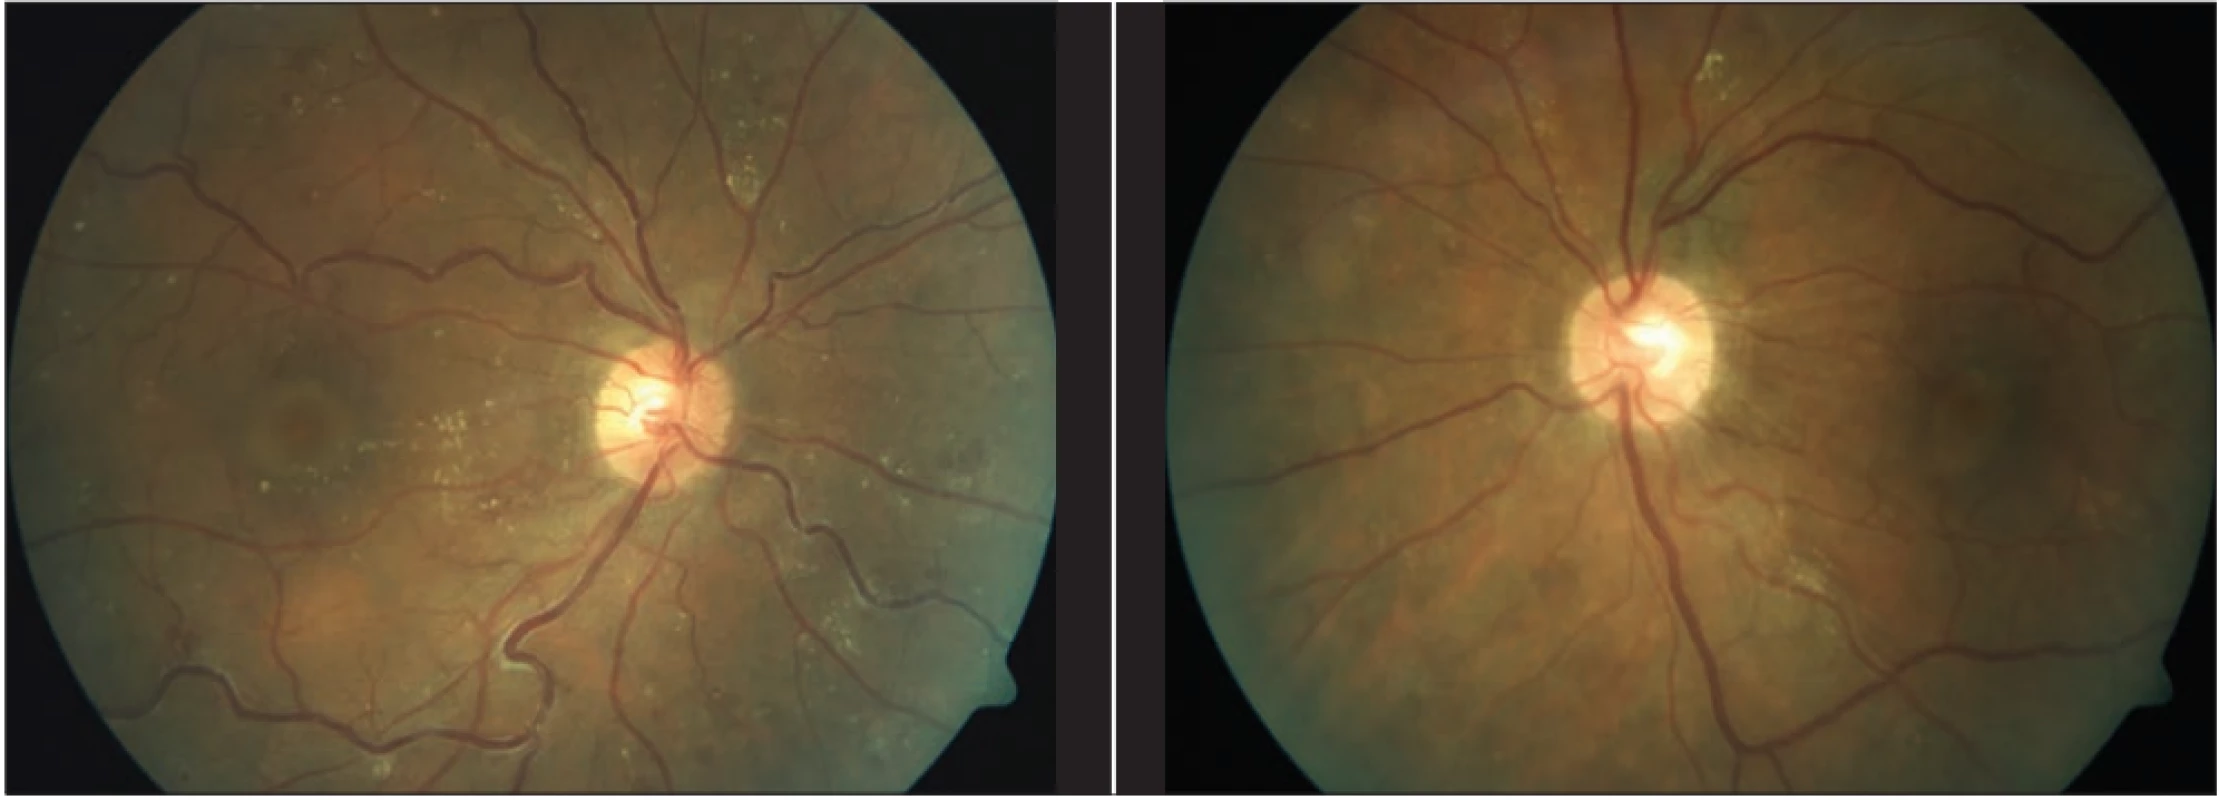  Finding on fundus of both eyes with time interval after laser coagulation of the retina: absorption of retinal haemorrhages, partially also of hard exudates, veins now less dilated and tortuous
